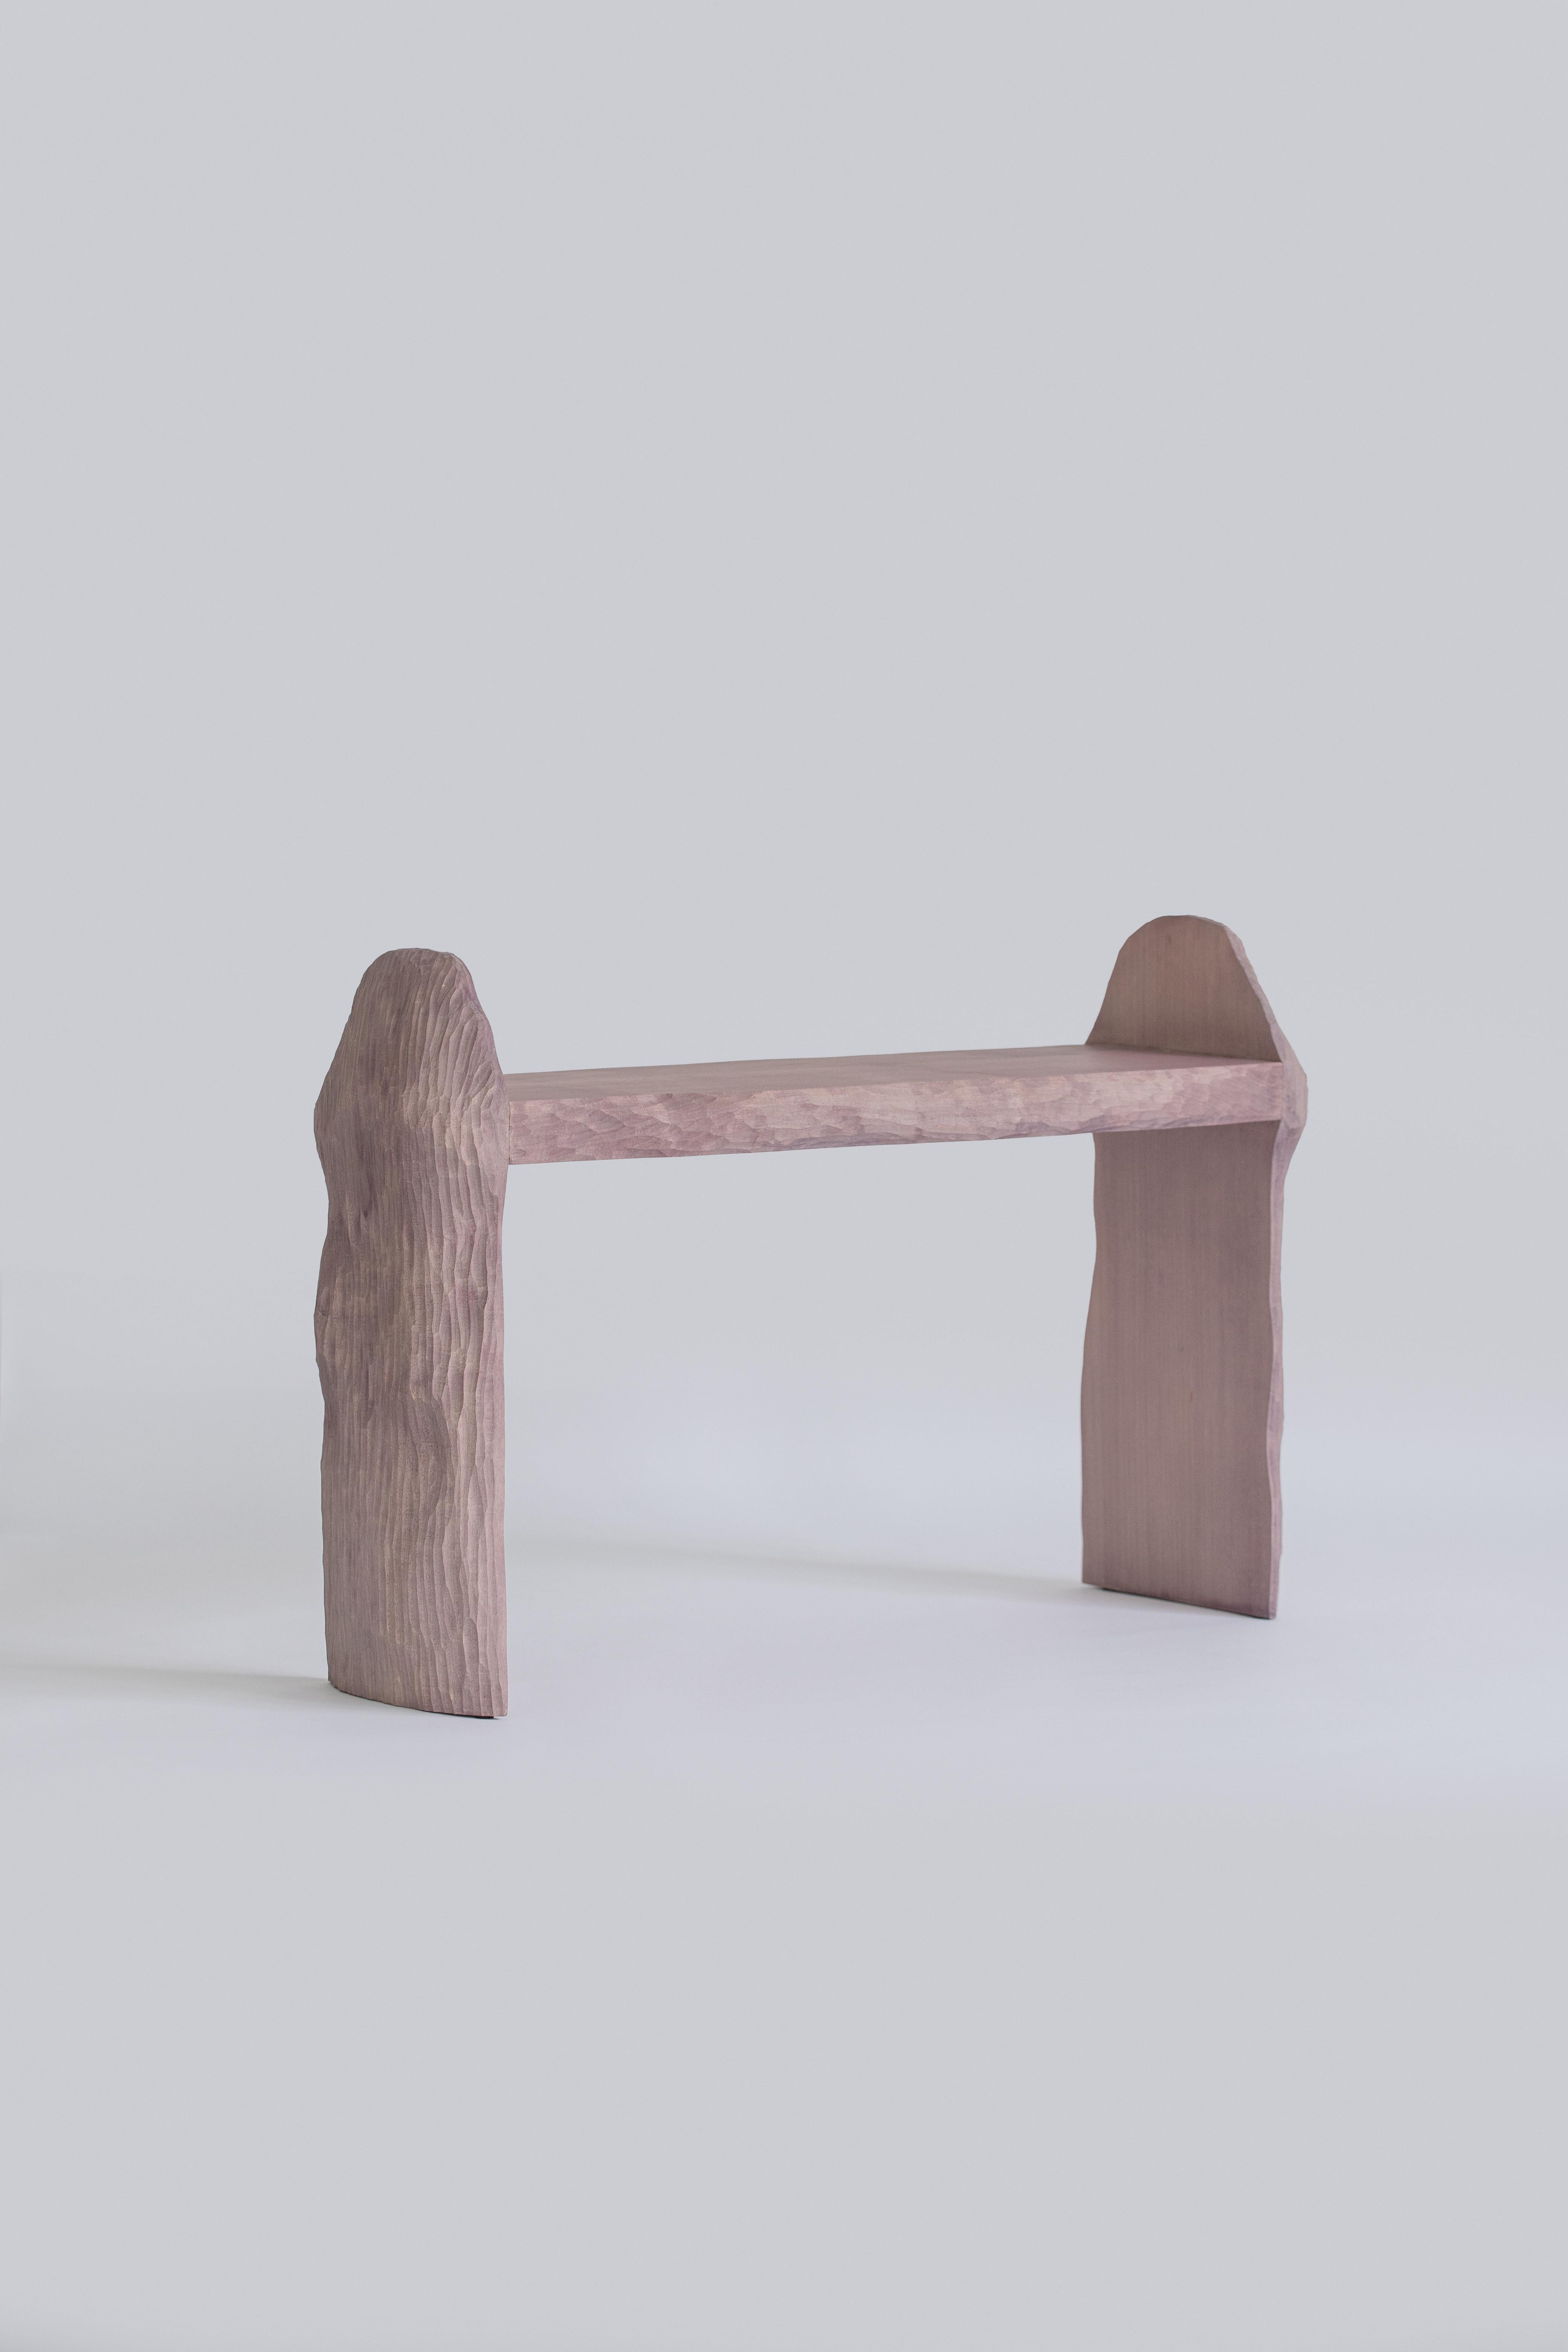 Intuitive Archaisme bench for two by Cedric Breisacher
Dimension: D 88 x W 27 x H 43 cm
Materials: Sycamore.
Finish: Campeche dye, wax-oiled.

Designer-sculptor, Cedric Breisacher has an atypical path. Self-taught man, he followed during five years